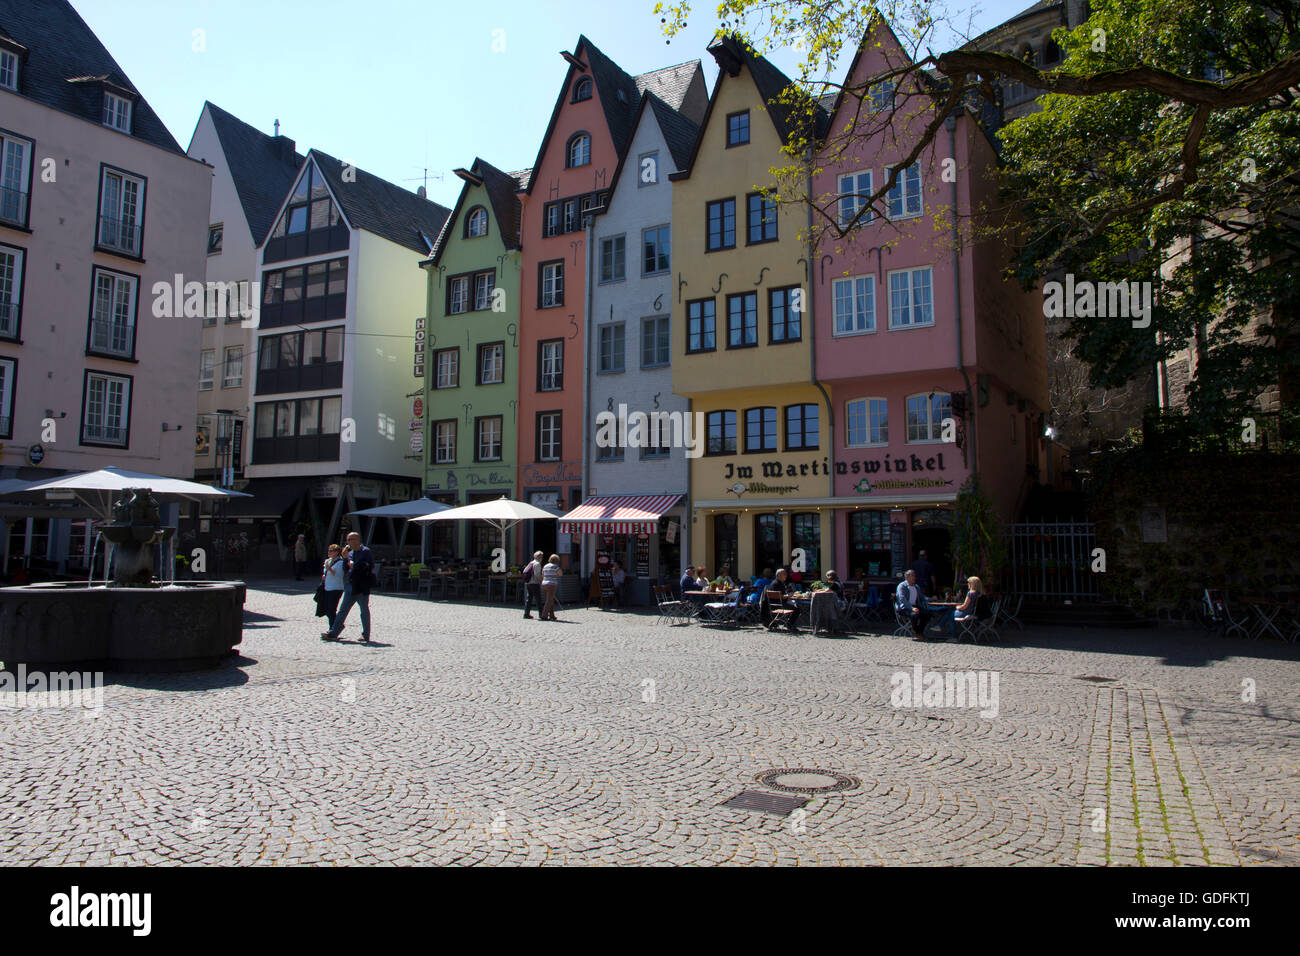 Situated on the banks on the Rhine in a section of Cologne known as Martinsviertel, the Old Fish Market, with Gothic townhouses. Stock Photo